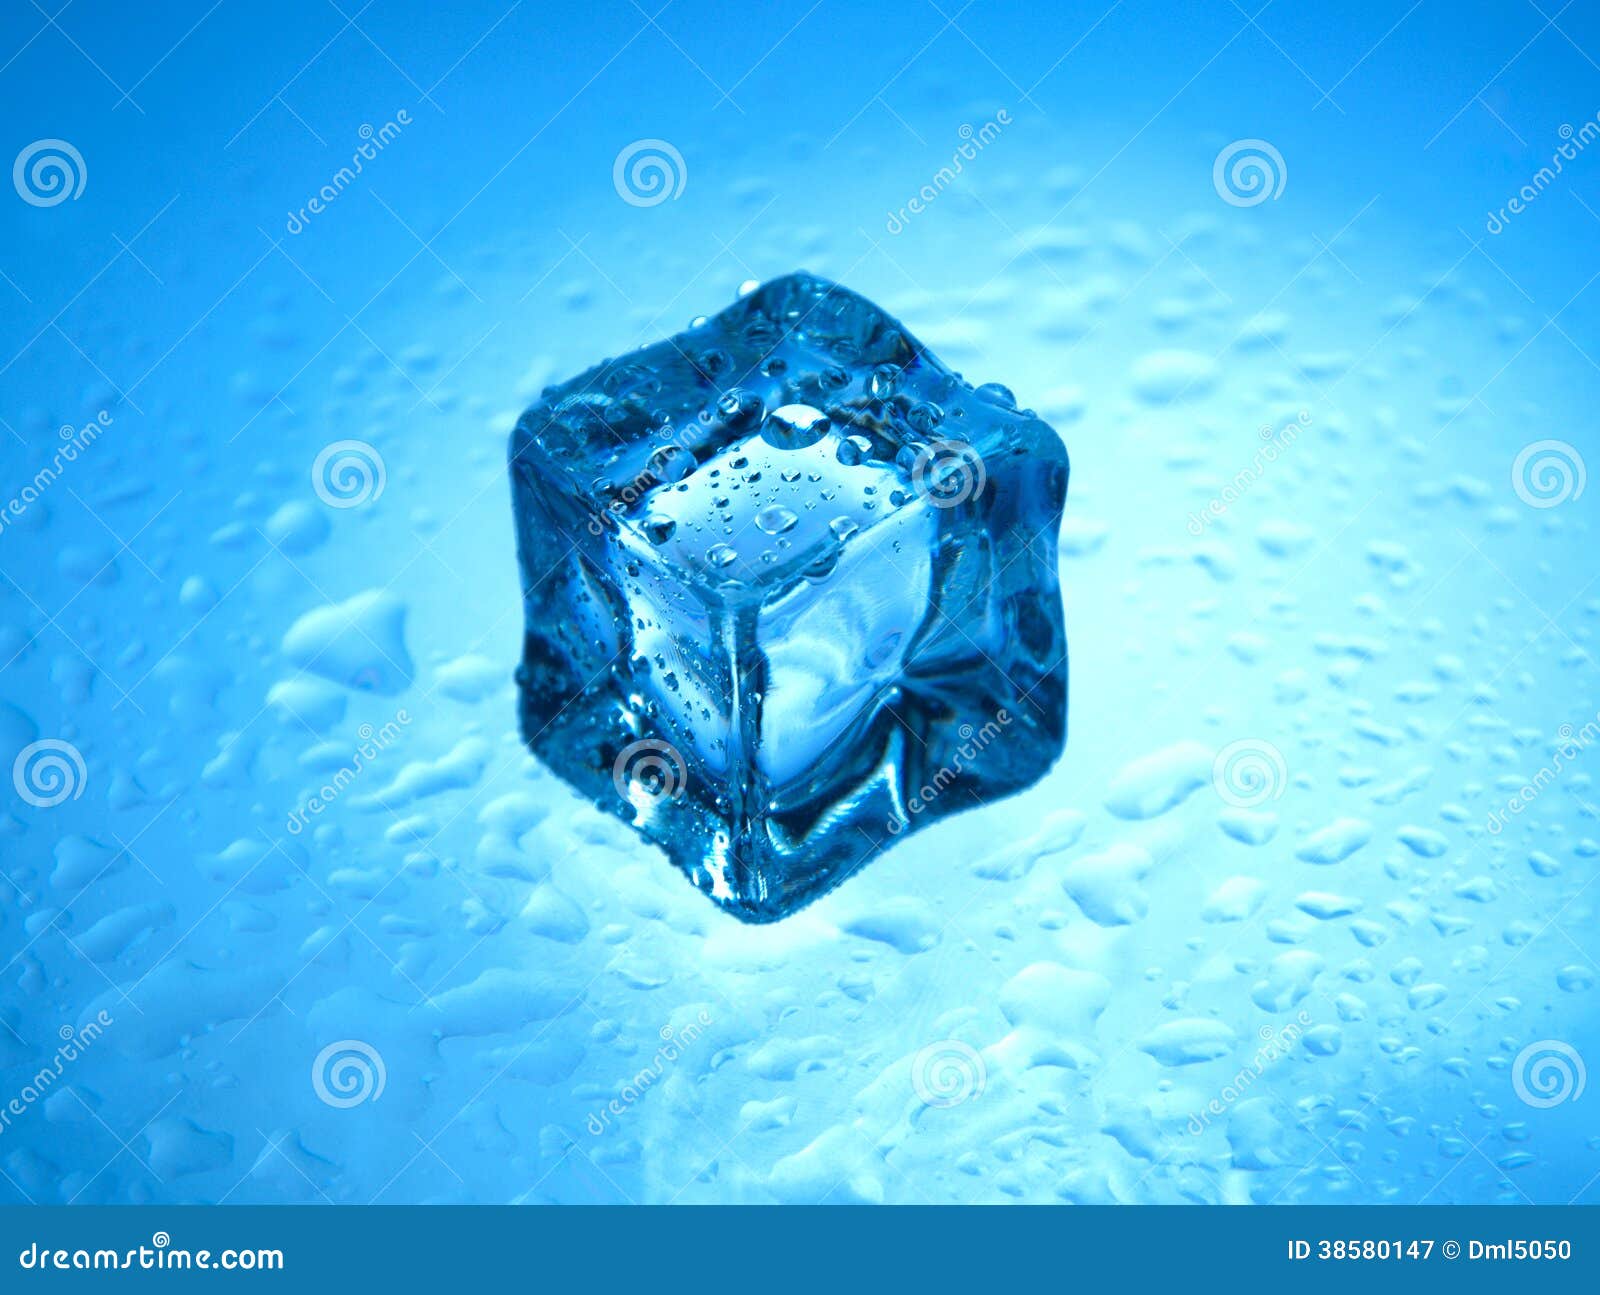 https://thumbs.dreamstime.com/z/one-frozen-ice-cube-clear-water-drops-blue-background-38580147.jpg